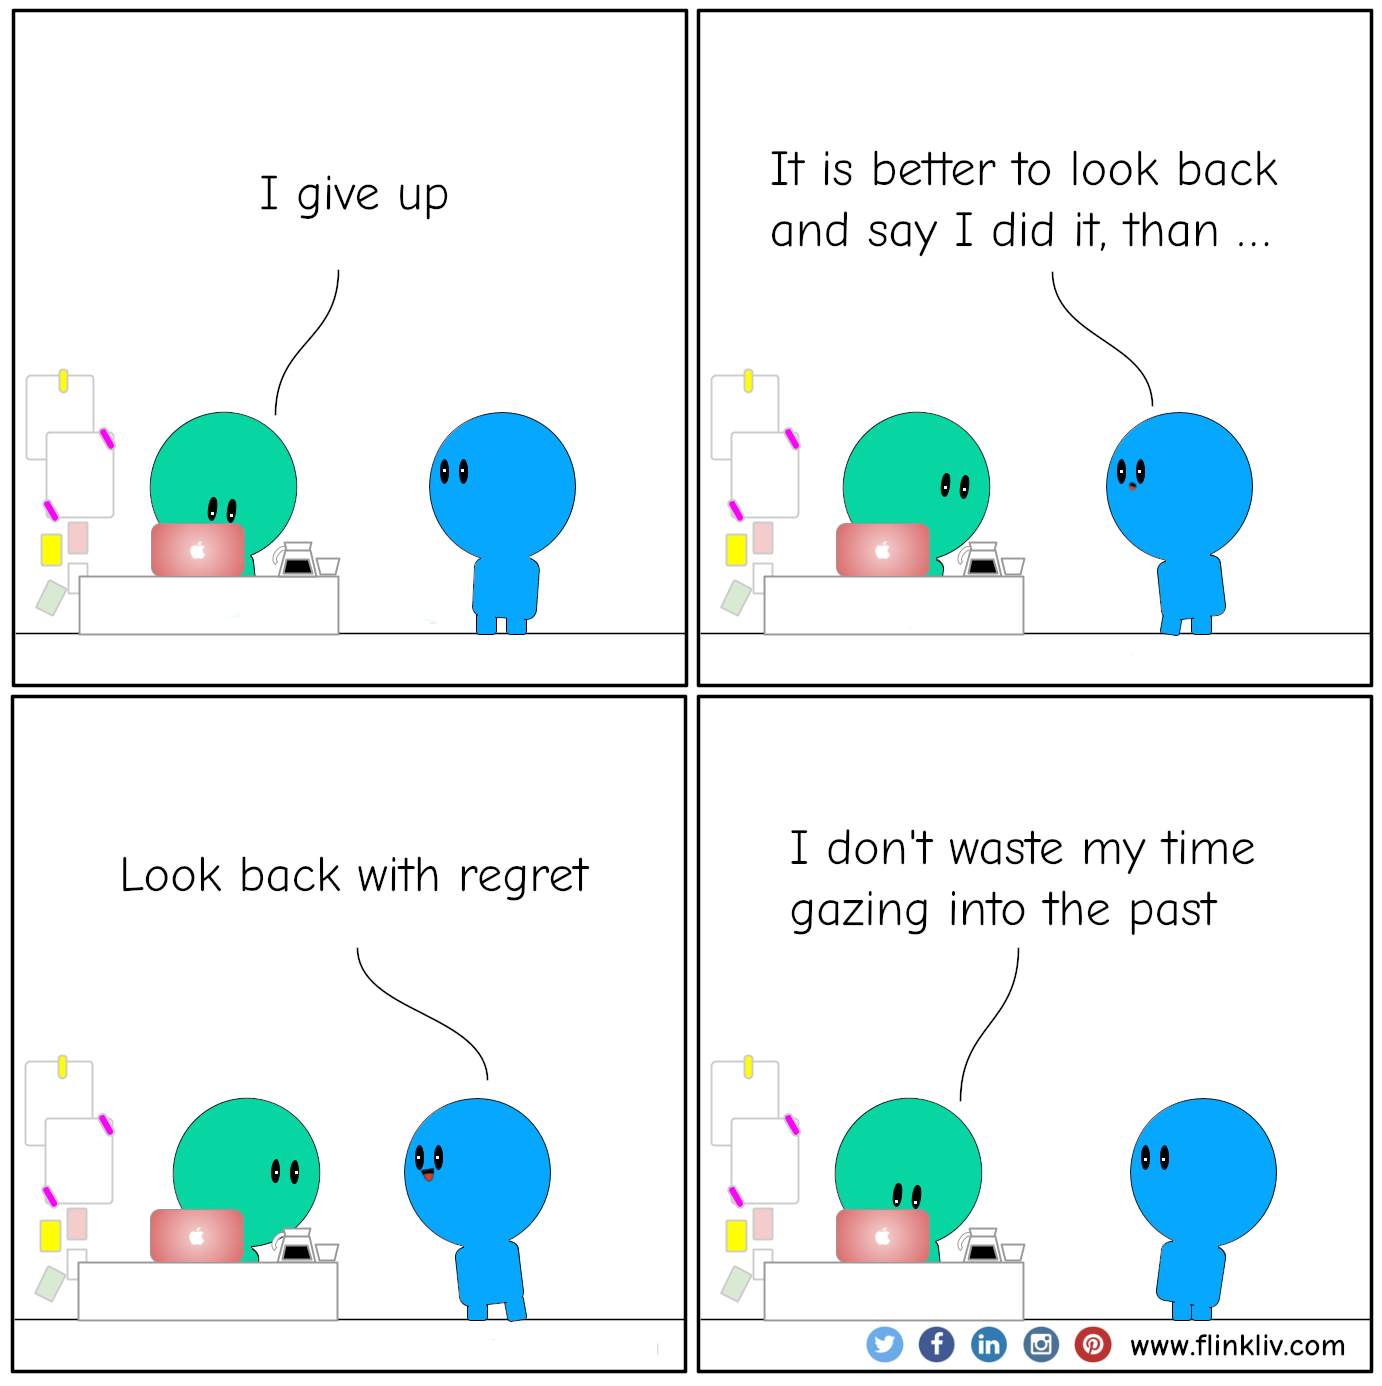 Conversation between A and B about it is better to look back and say I  did that than look back with regret
				A: I give up
				B: It is better to look back and say I  did that than look back with regret
				A: I don't waste my time gazing into the past.
			